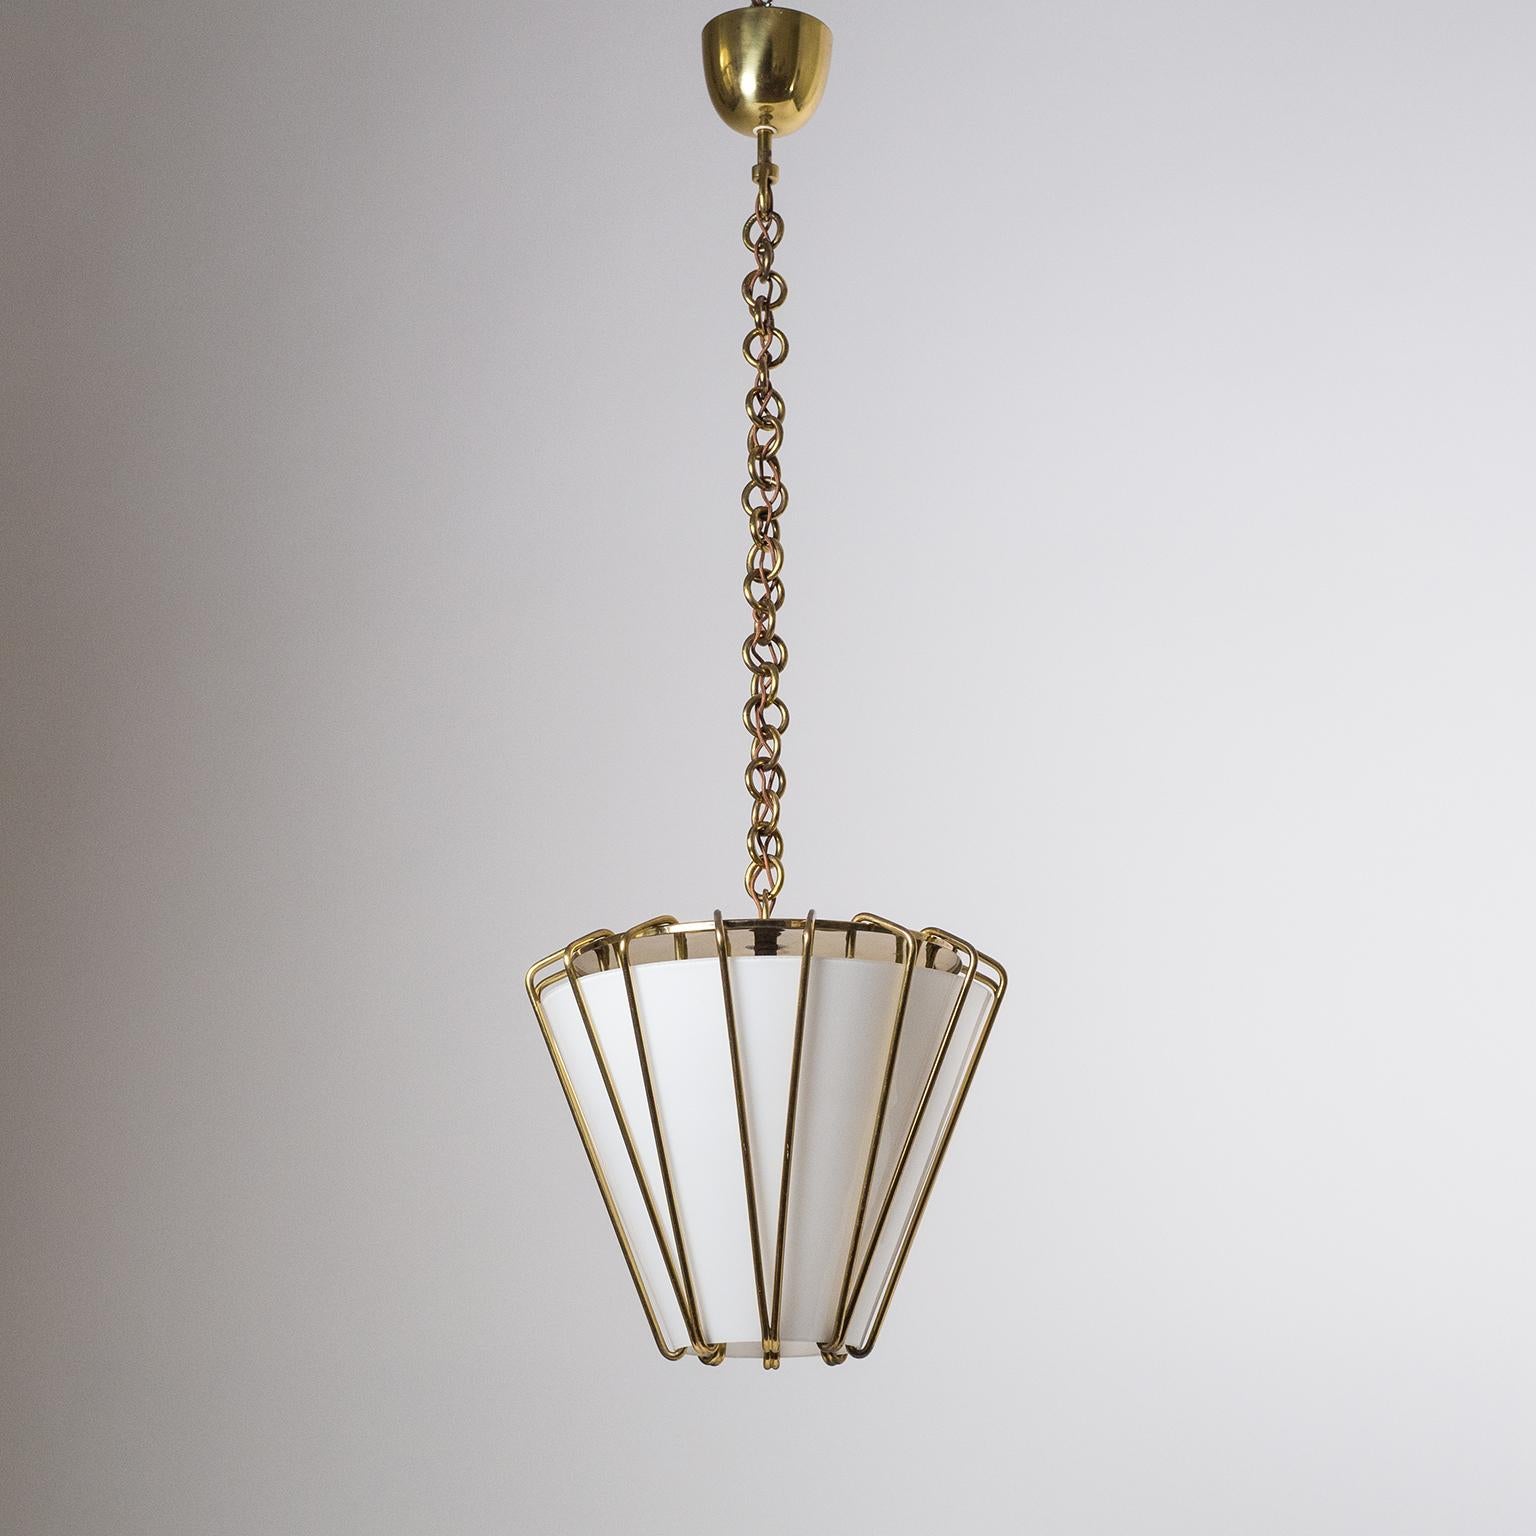 Rare pair of J.T. Kalmar pendants or lanterns from the 1940s in brass and glass. The large conical glass diffusers are suspended by an ingenious design of thick brass wires. Very nice original condition with some patina to the brass, most notably on